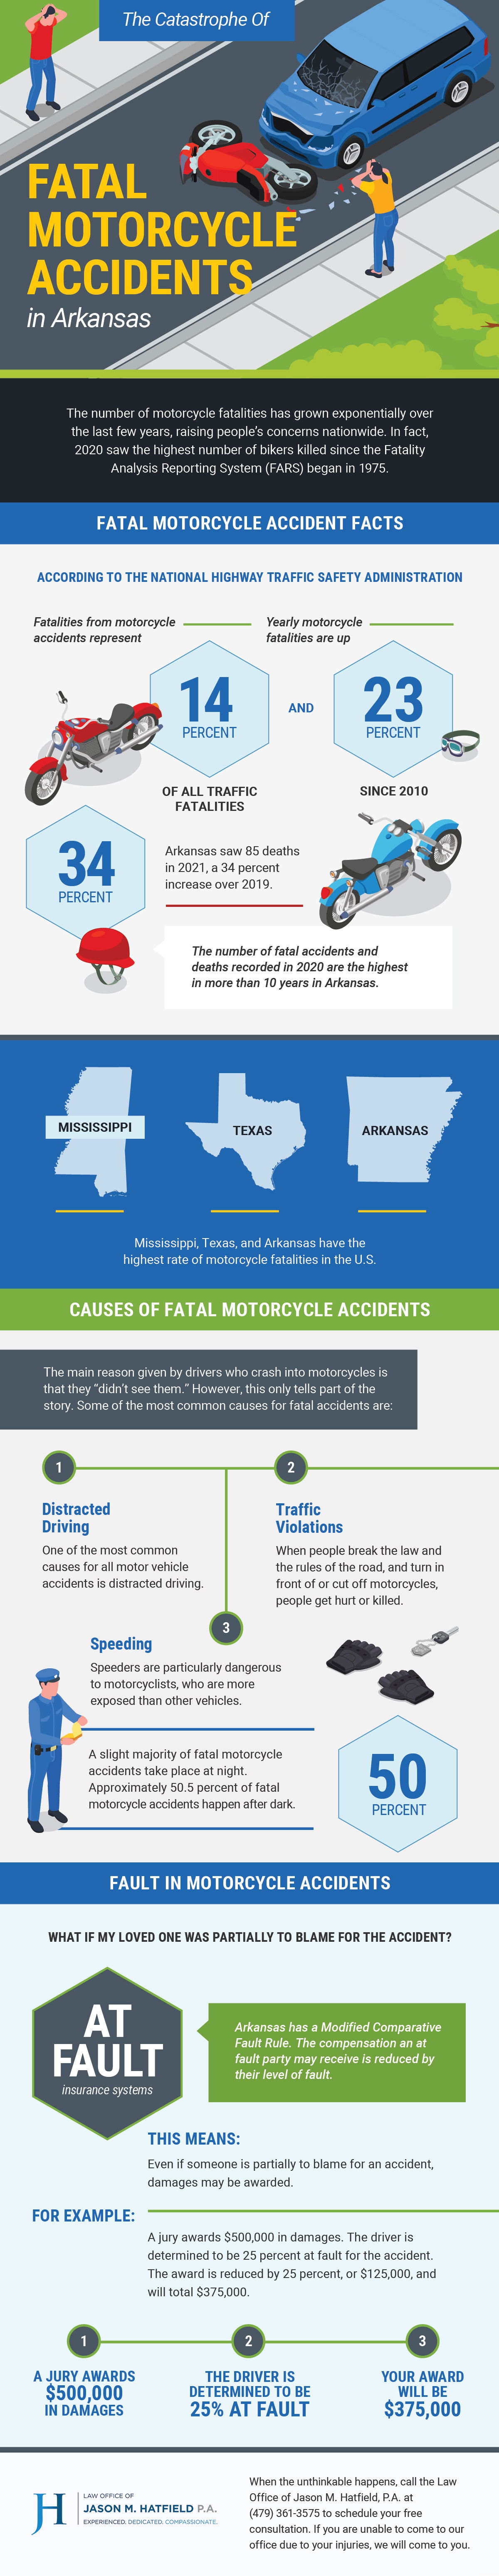 The Catastrophe of Fatal Motorcycle Accidents in Arkansas